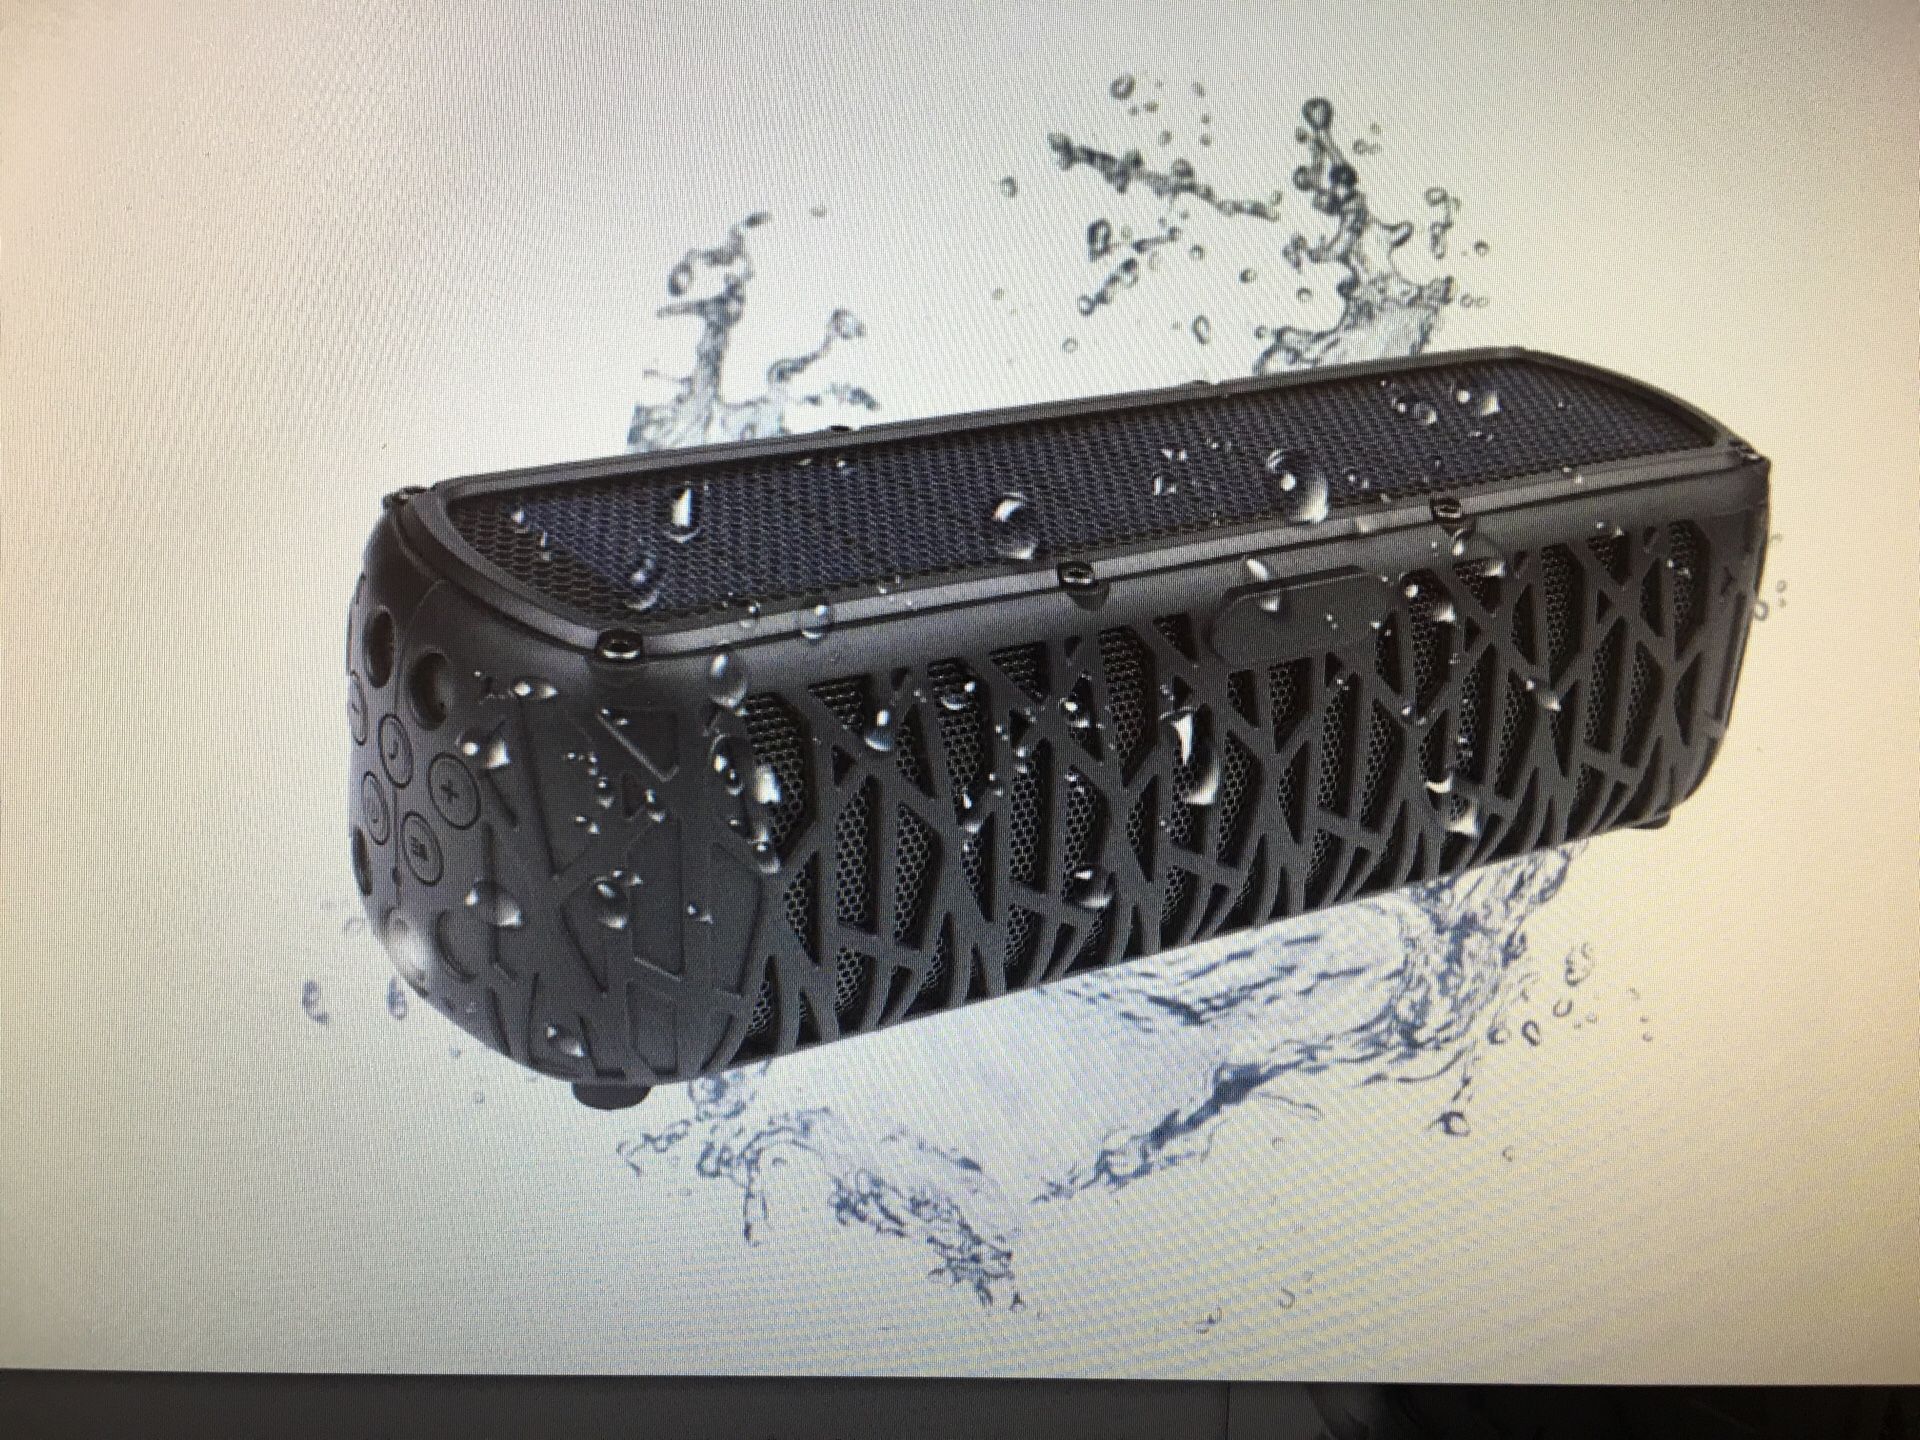 Waterproof and portable wireless Bluetooth speaker (NEW) Price OBO or items